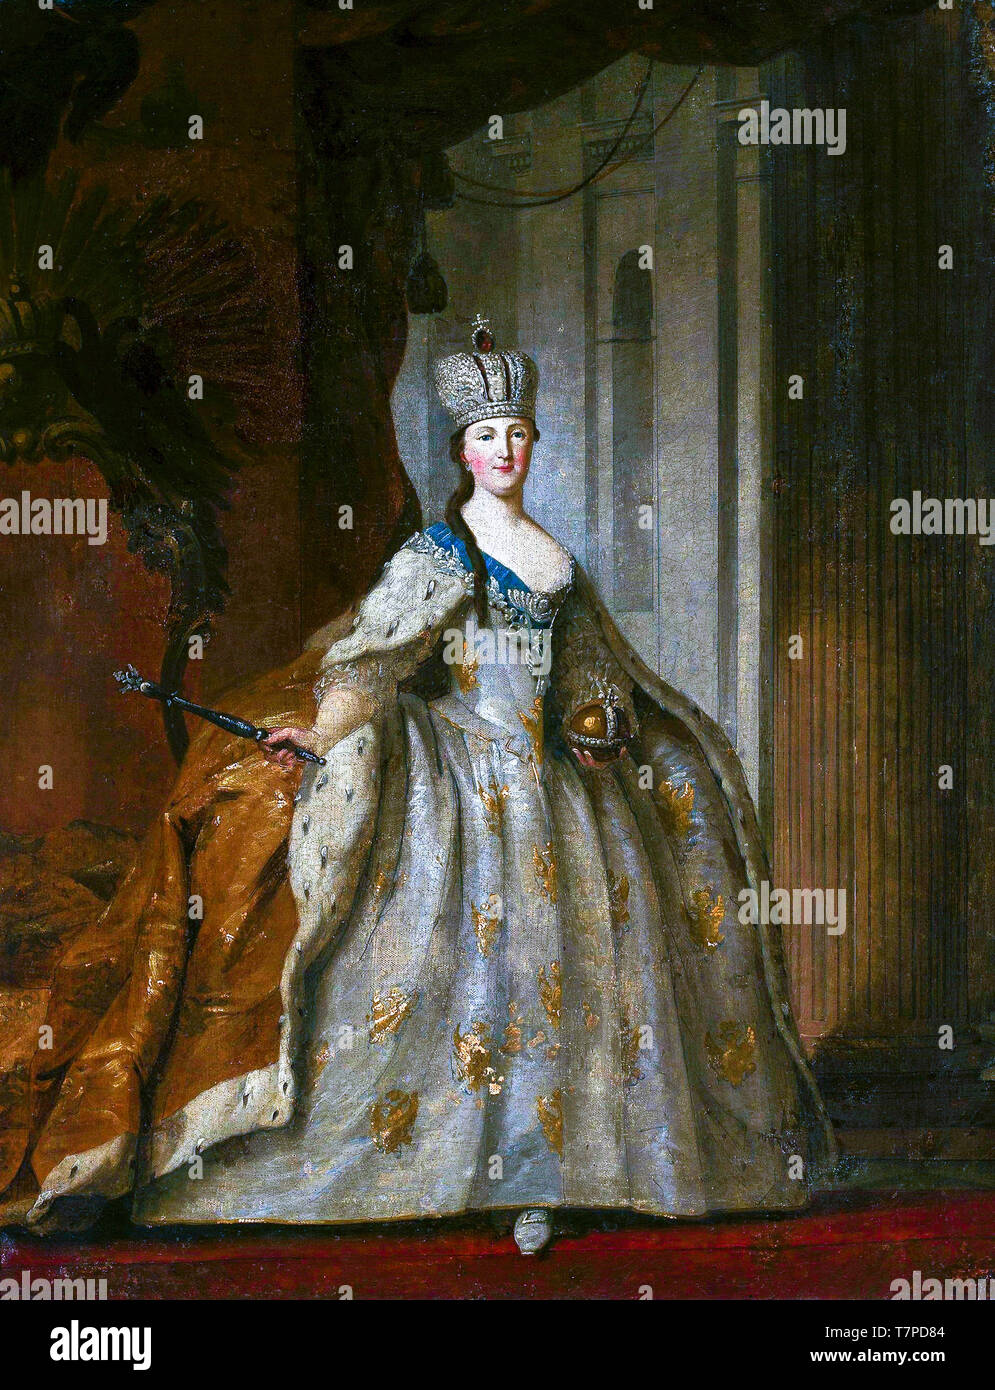 Ivan Argunov, Portrait of Catherine the Great, after 1762 with crown orb & sceptre Stock Photo